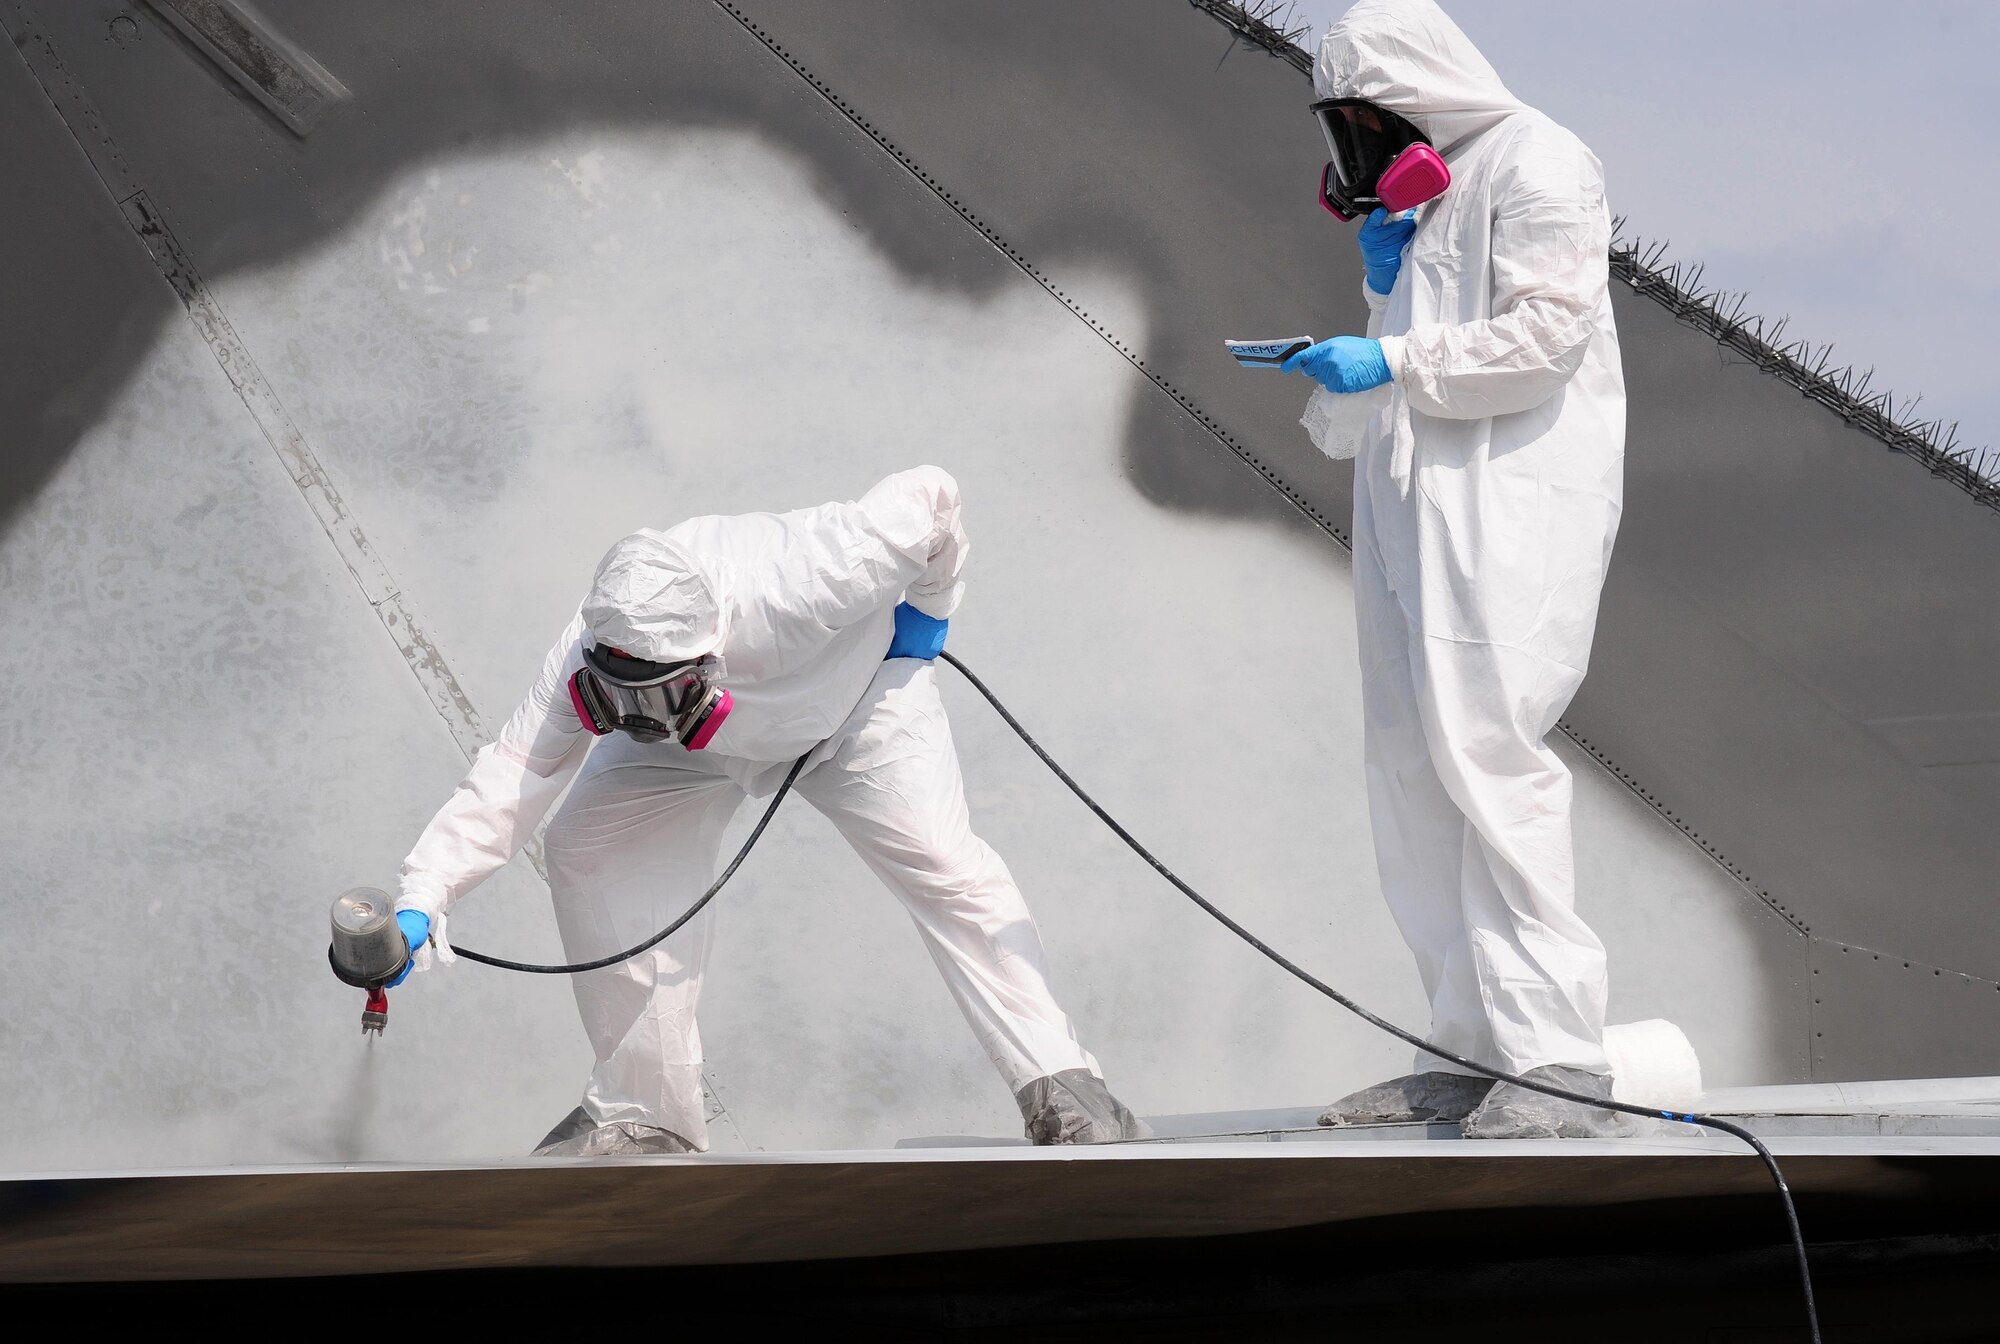 Low observable technicians from the 509th Maintenance Squadron, spray a coating of paint onto an FB-111A General Dynamics Aardvark static display at Whiteman Air Force Base, Mo., Sept. 13, 2016. During the restoration process, the aircraft was sanded, primed, repainted and received corrosion maintenance. (U.S. Air Force photo by Senior Airman Joel Pfiester)